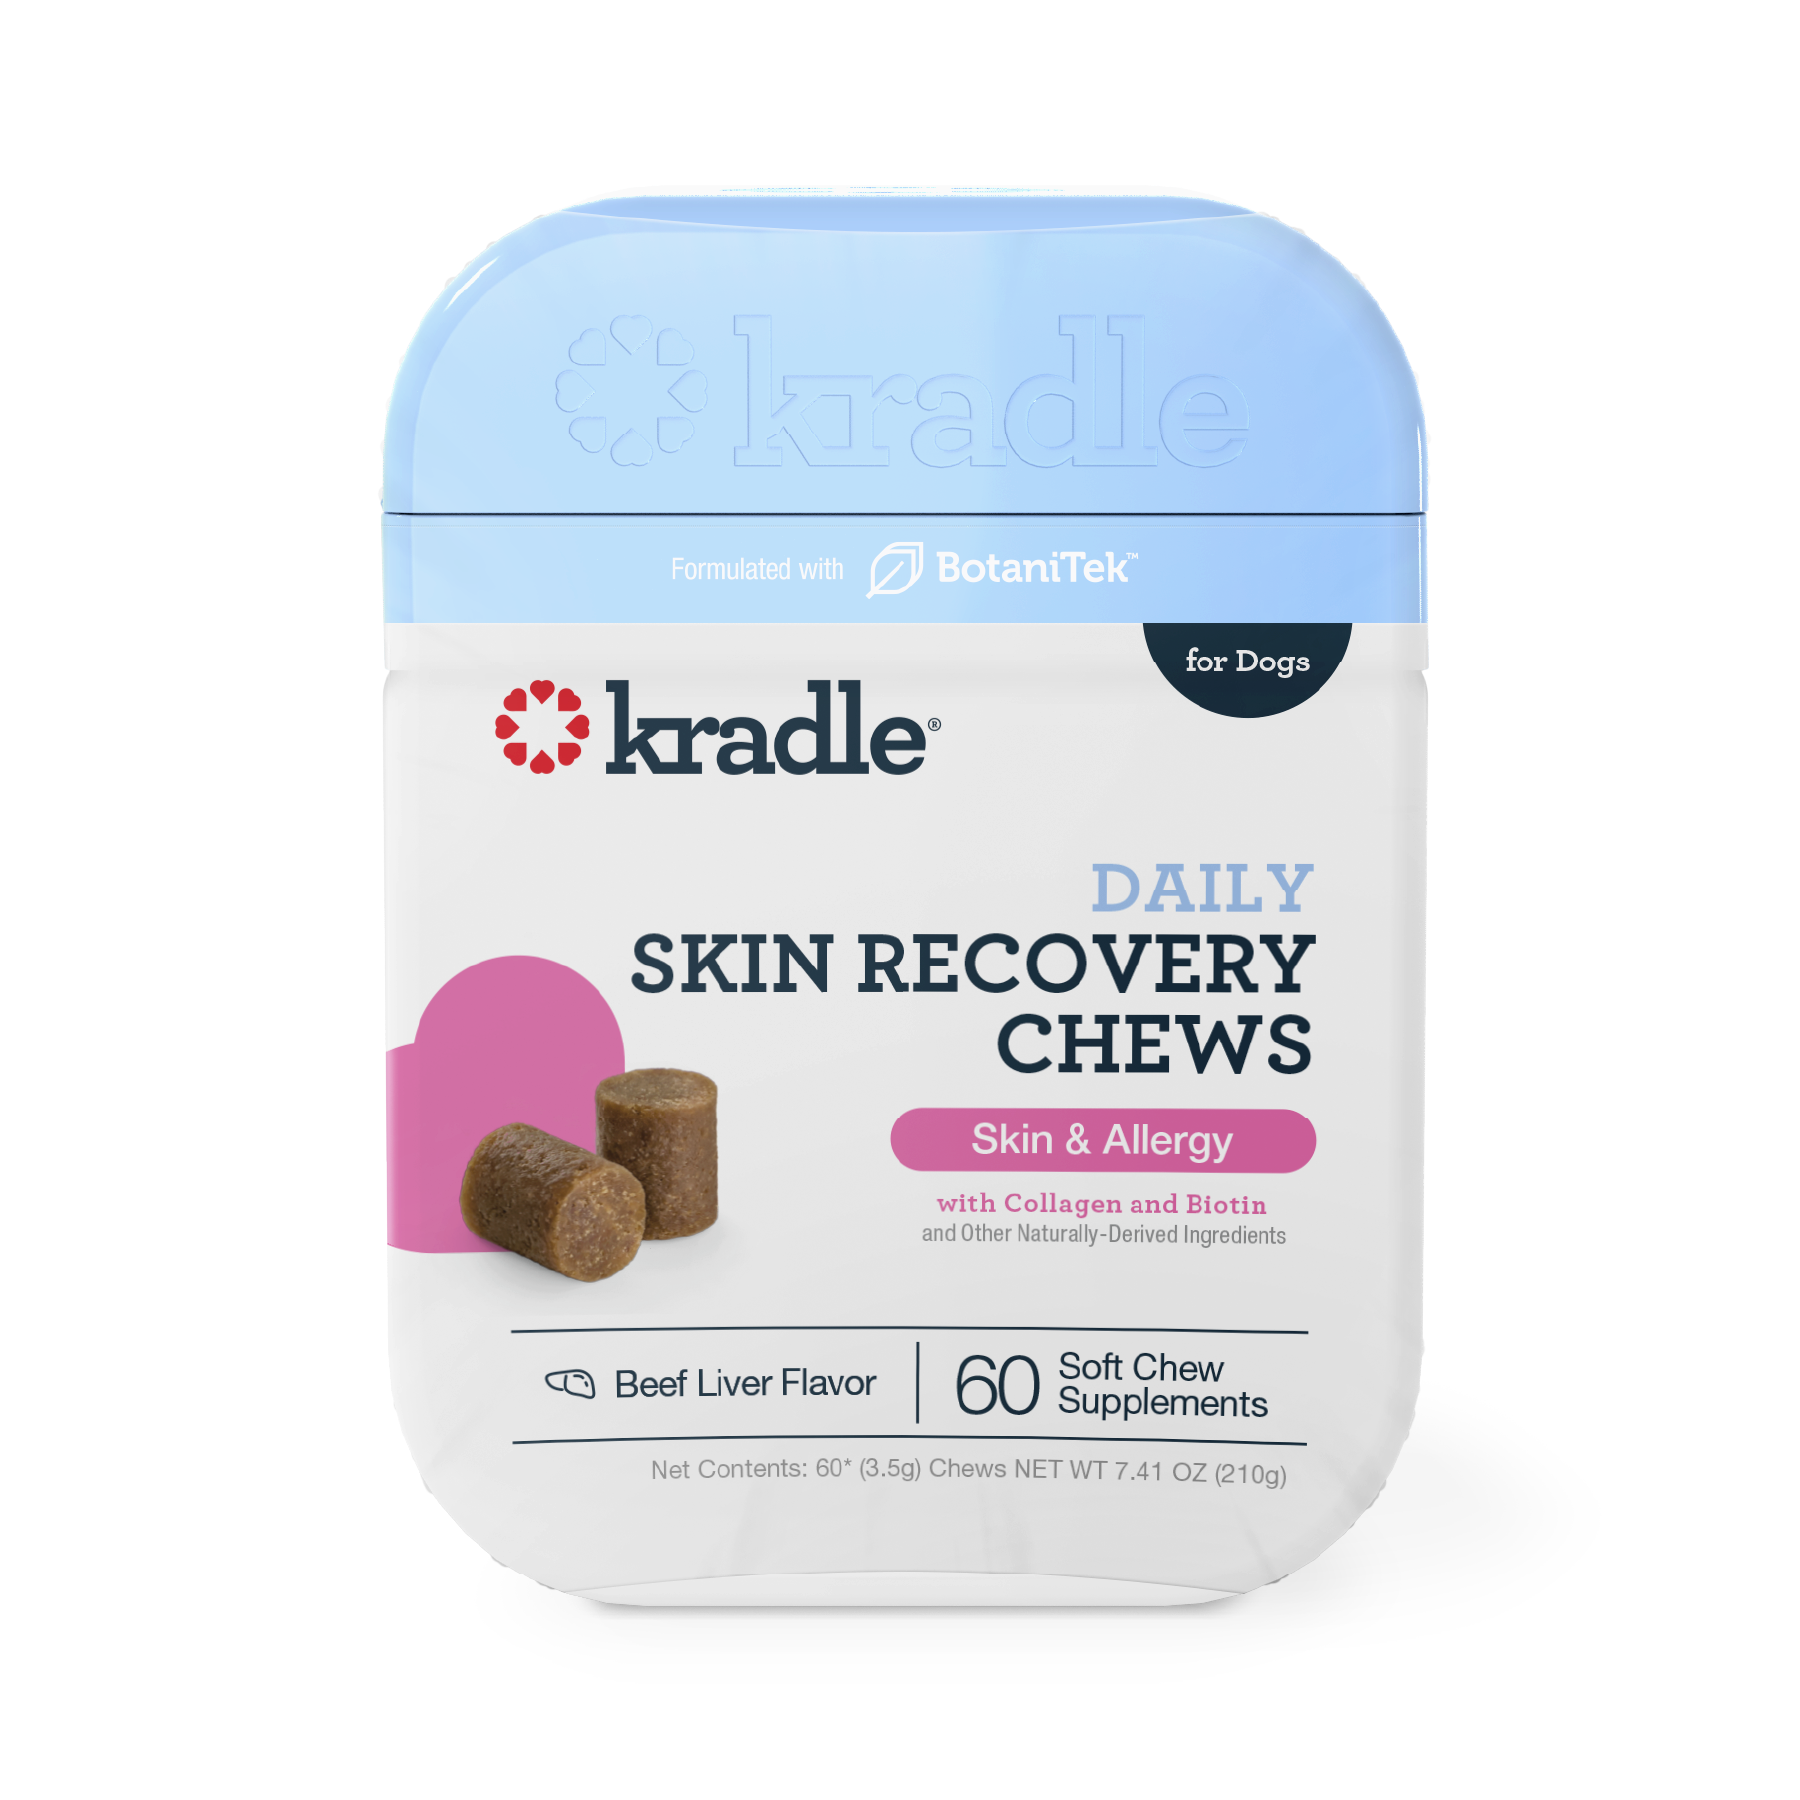 Daily Skin Recovery Chews